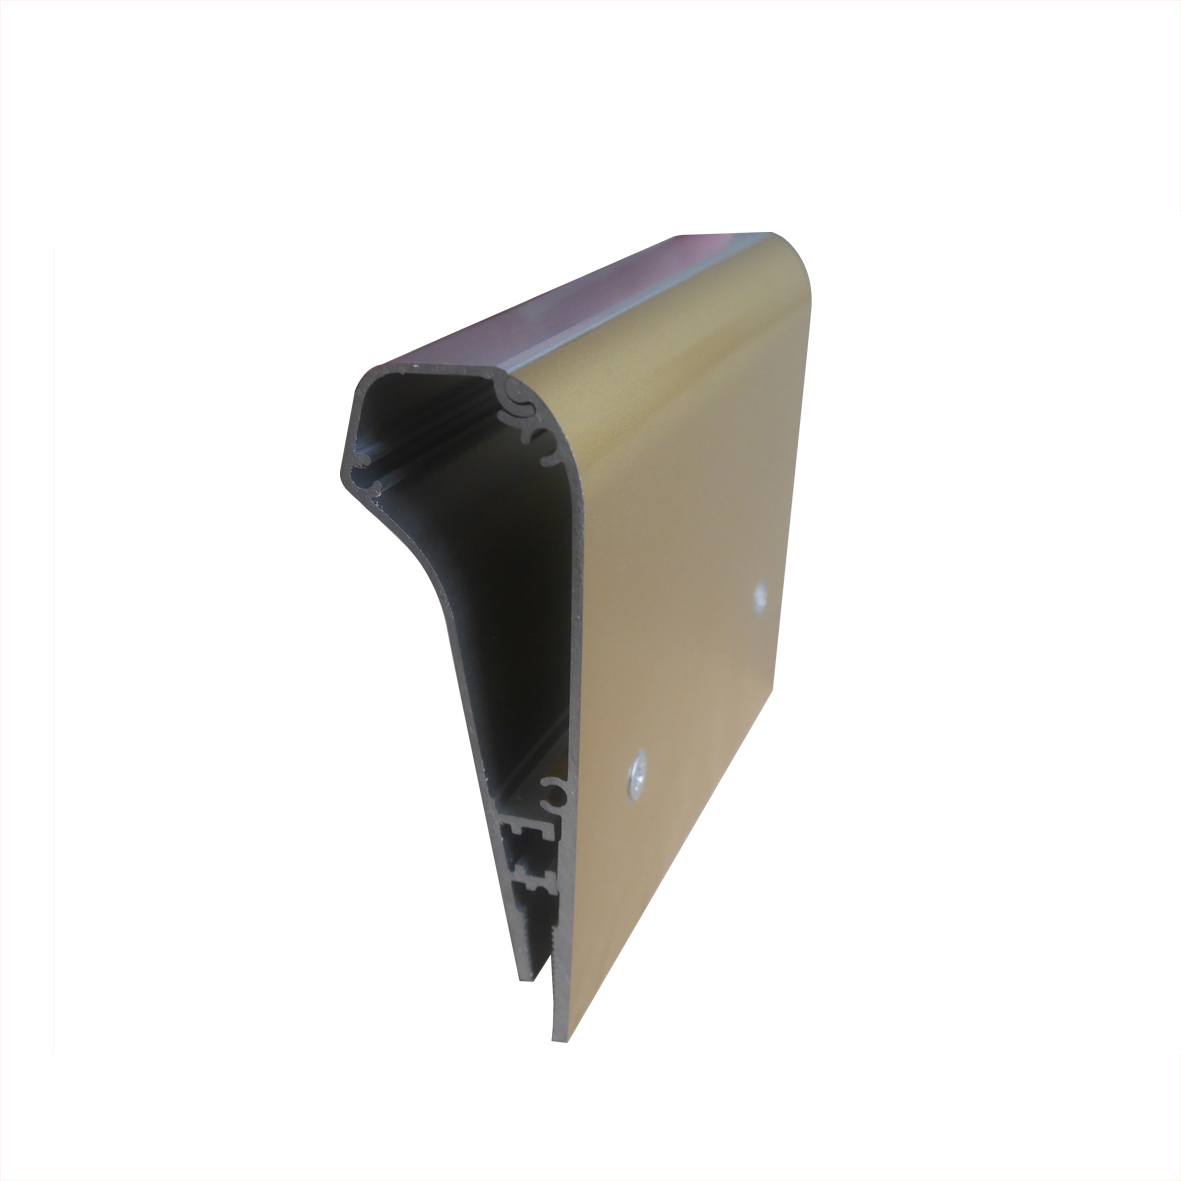 Gold color aluminum handle squeegee